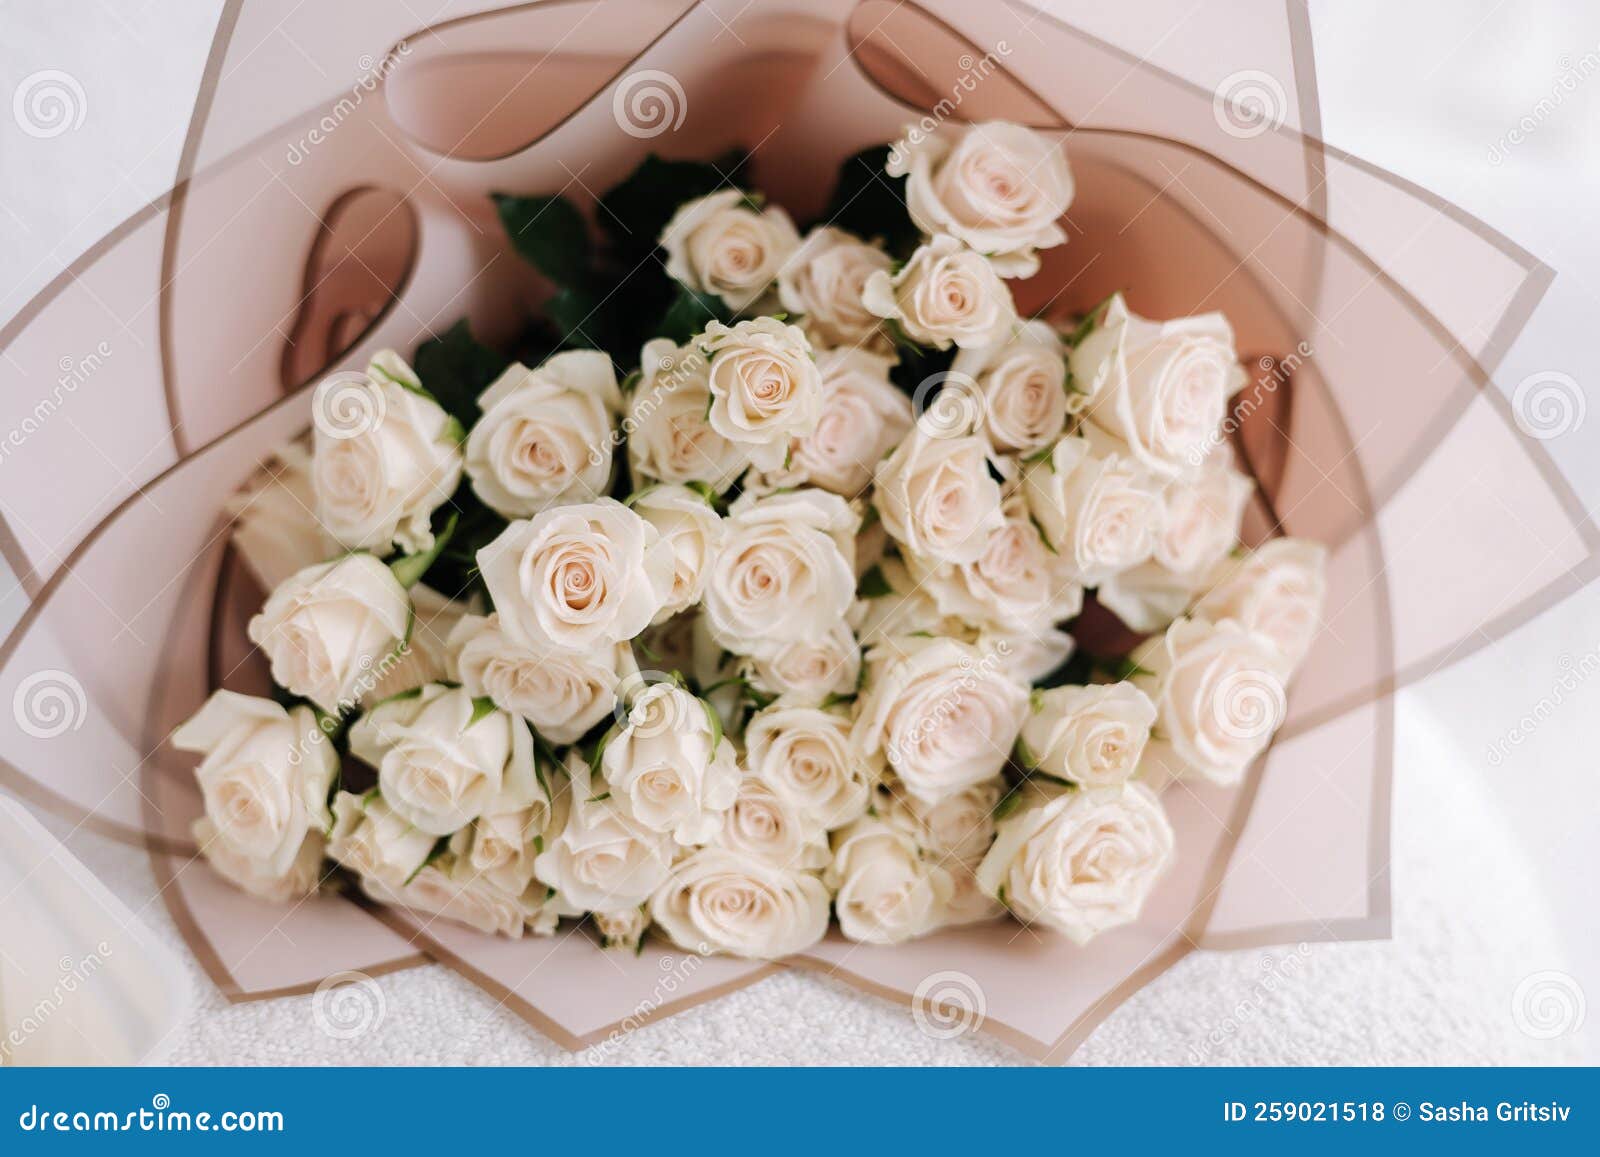 bouquet of white flowers in gift packaging. reses